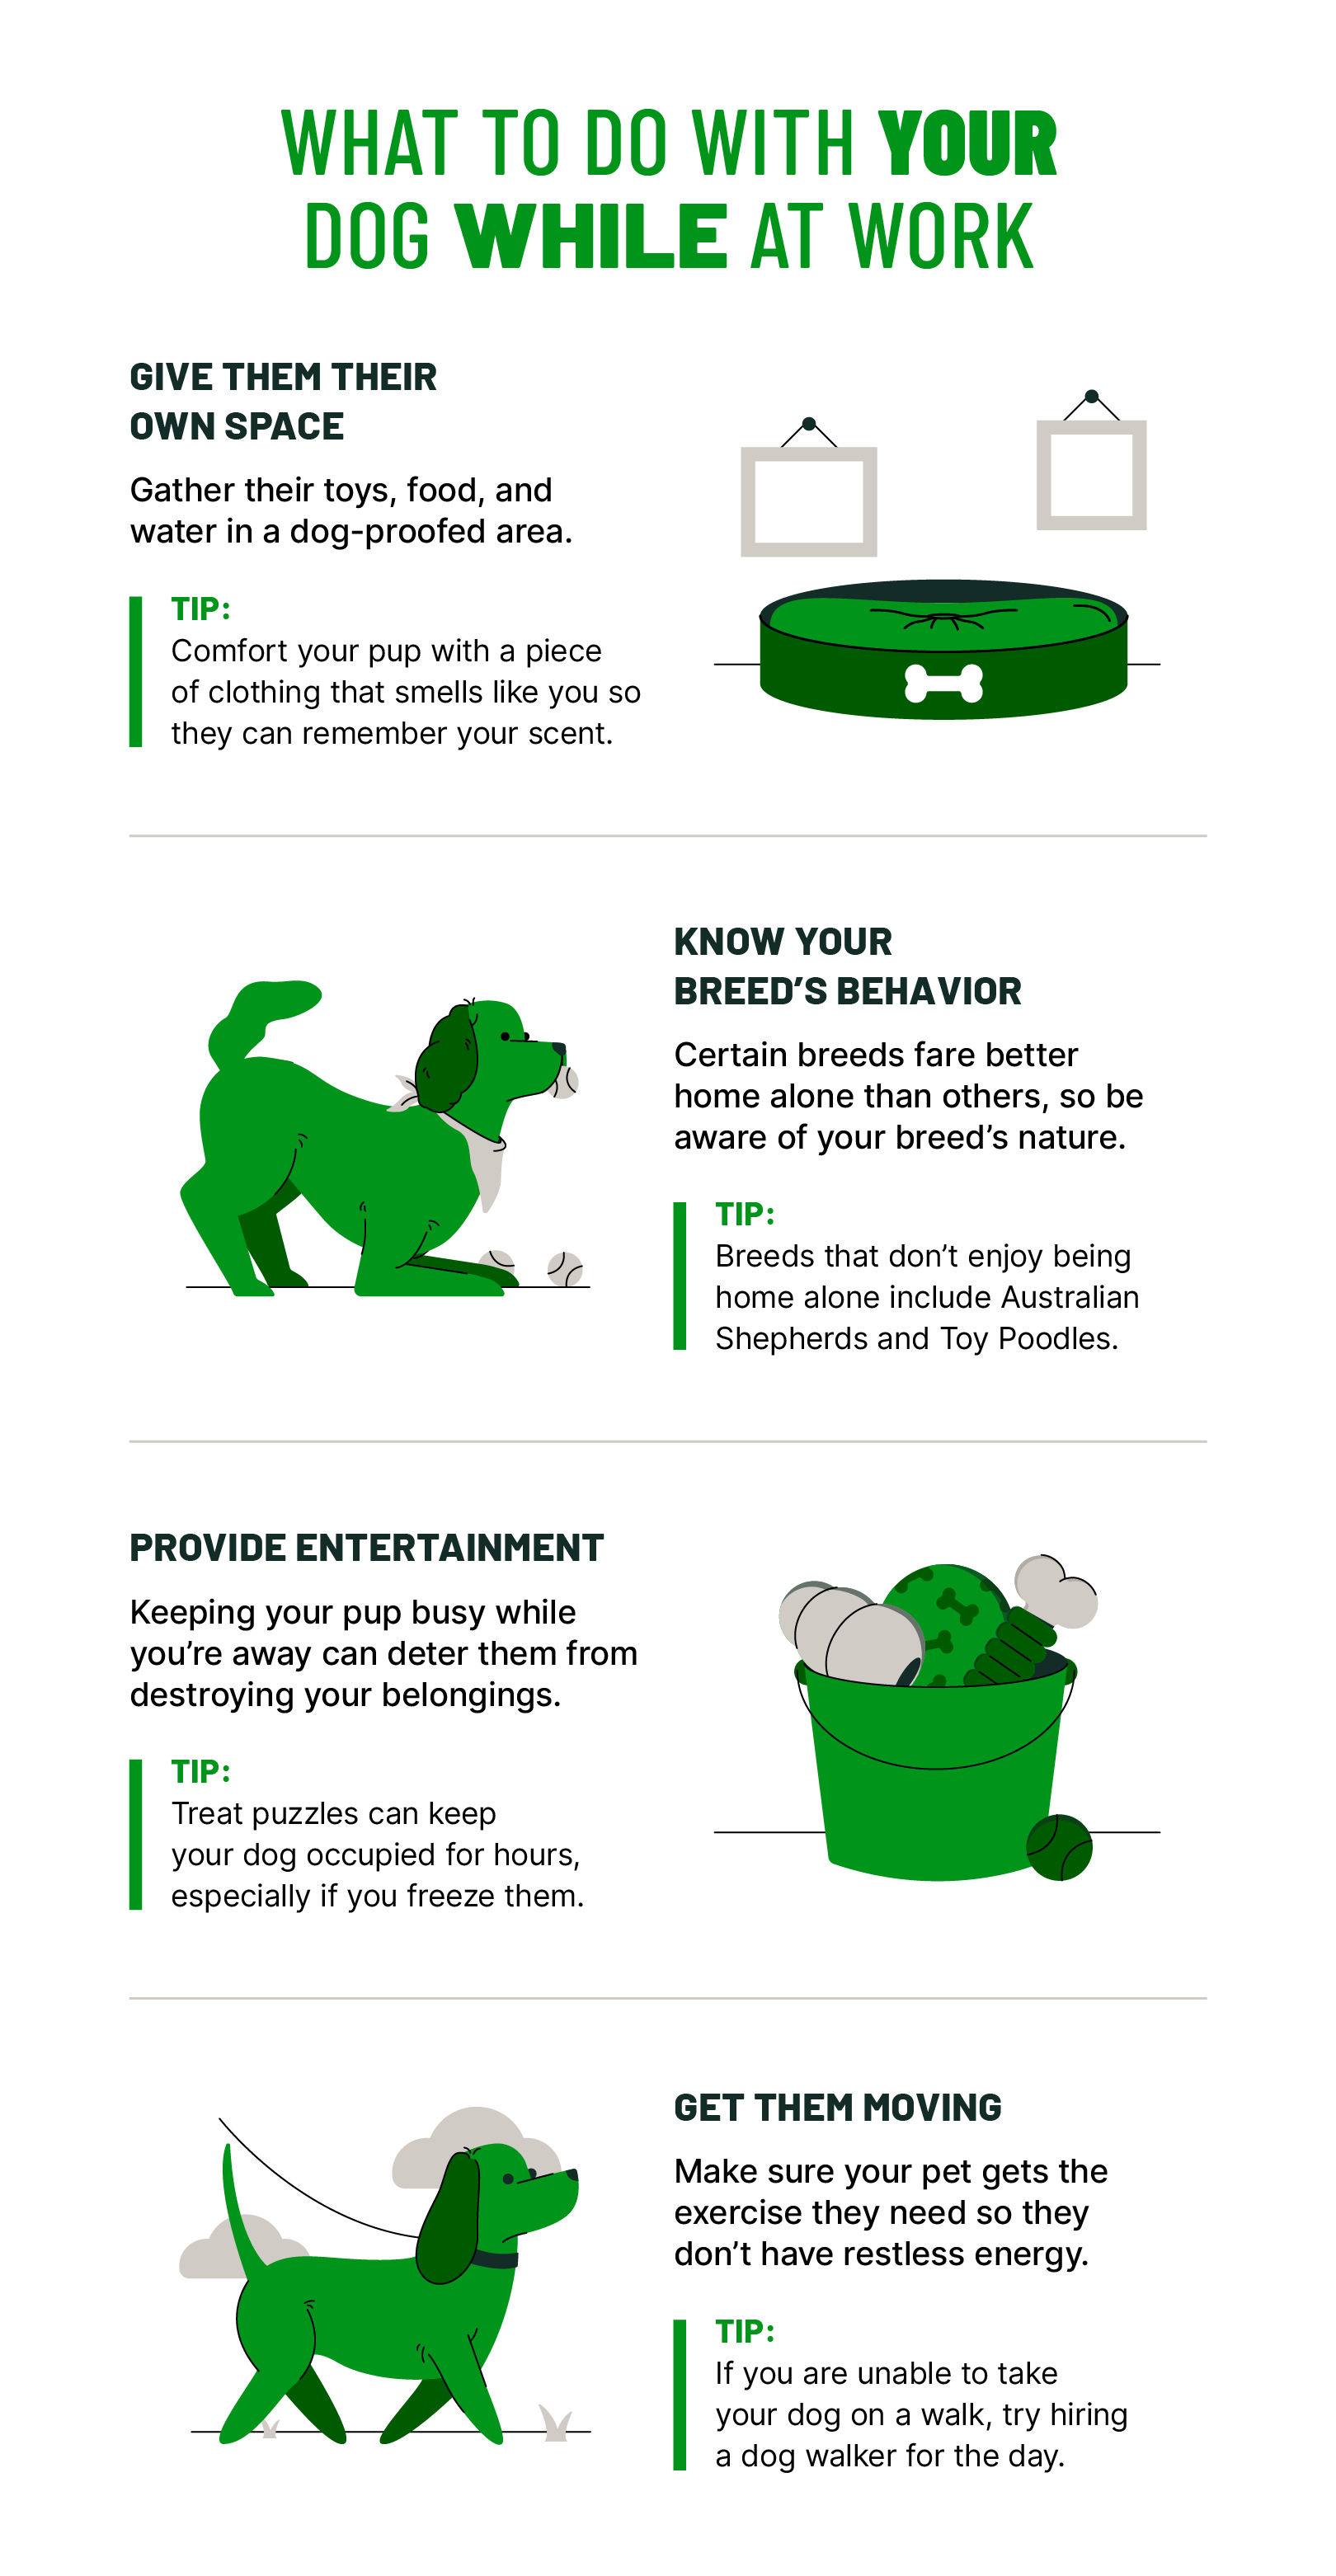 Illustrations and copy covering what to do with your dog while at work